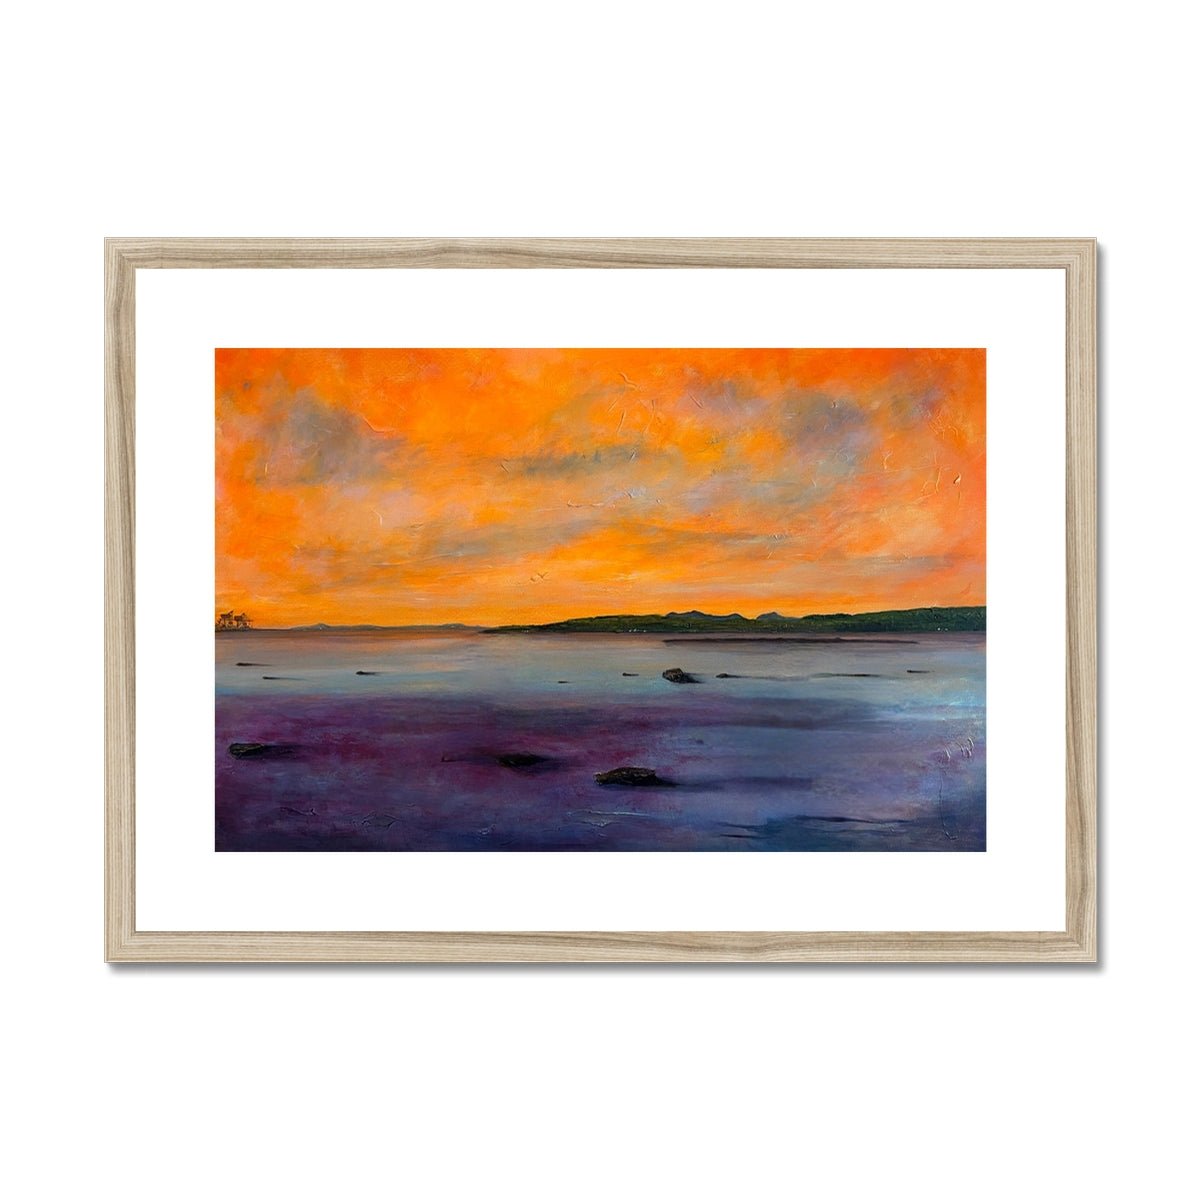 Looking From Largs Painting | Framed & Mounted Prints From Scotland-Framed & Mounted Prints-River Clyde Art Gallery-A2 Landscape-Natural Frame-Paintings, Prints, Homeware, Art Gifts From Scotland By Scottish Artist Kevin Hunter